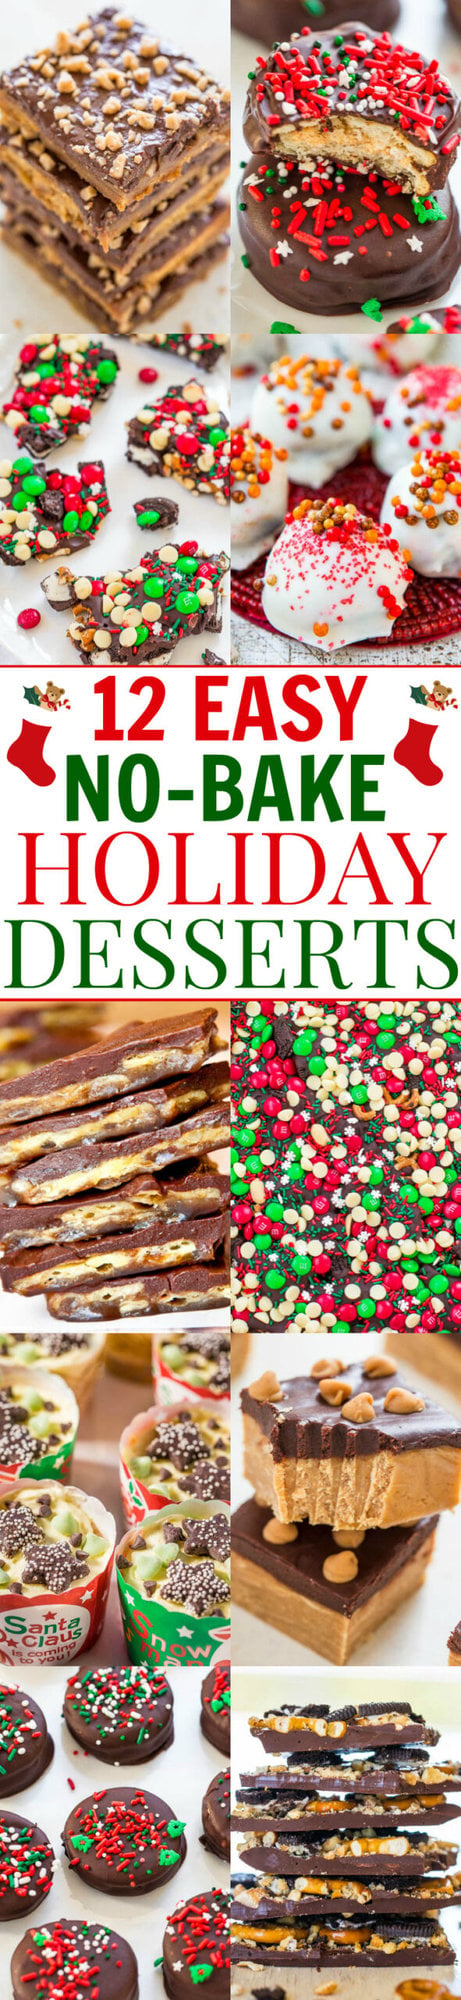 12 Easy No-Bake Holiday Desserts - No time to bake? Here are 12 FAST and EASY no-bake recipes! Whether you want chocolate, peanut butter, cheesecake, bark, or truffles, these recipes have you covered!!